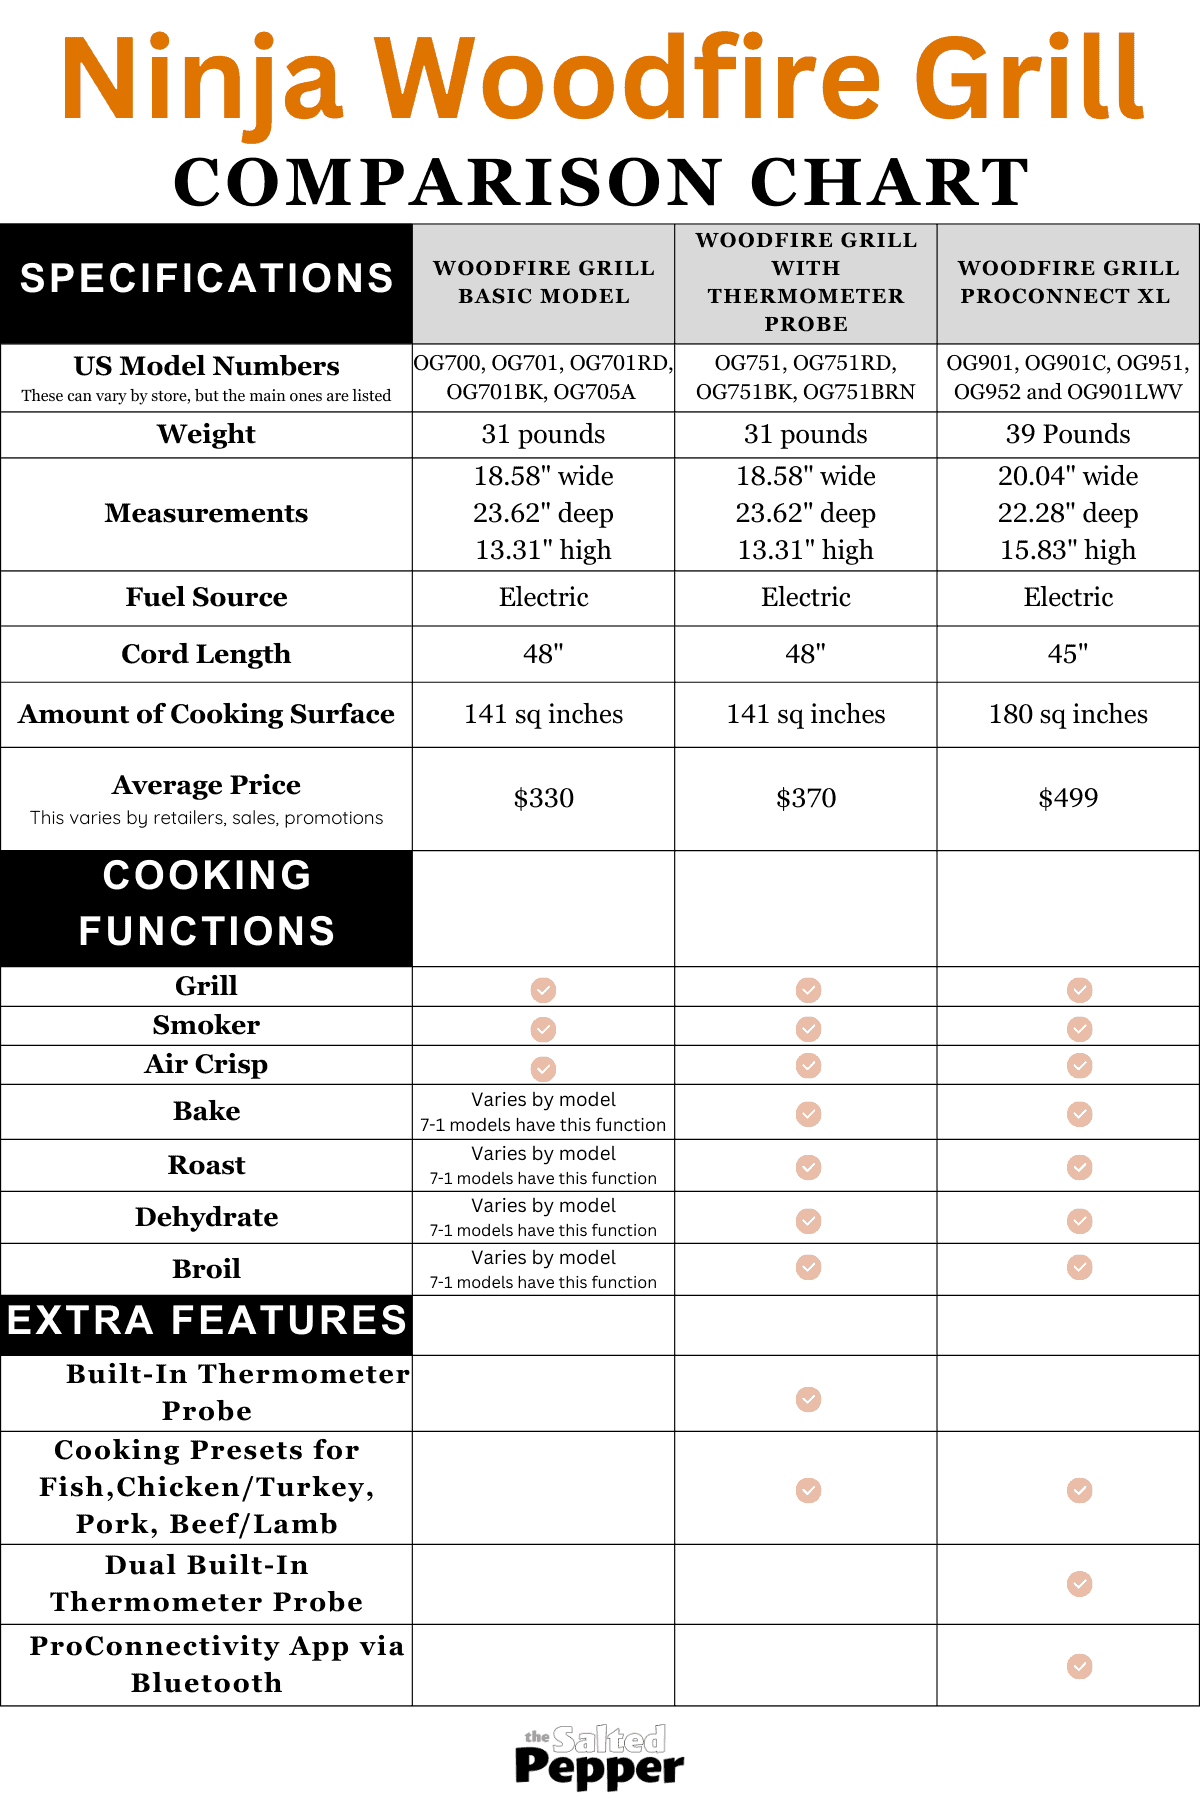 Ninja Woodfire Comparison guide showing various functions, features, specs of different models.